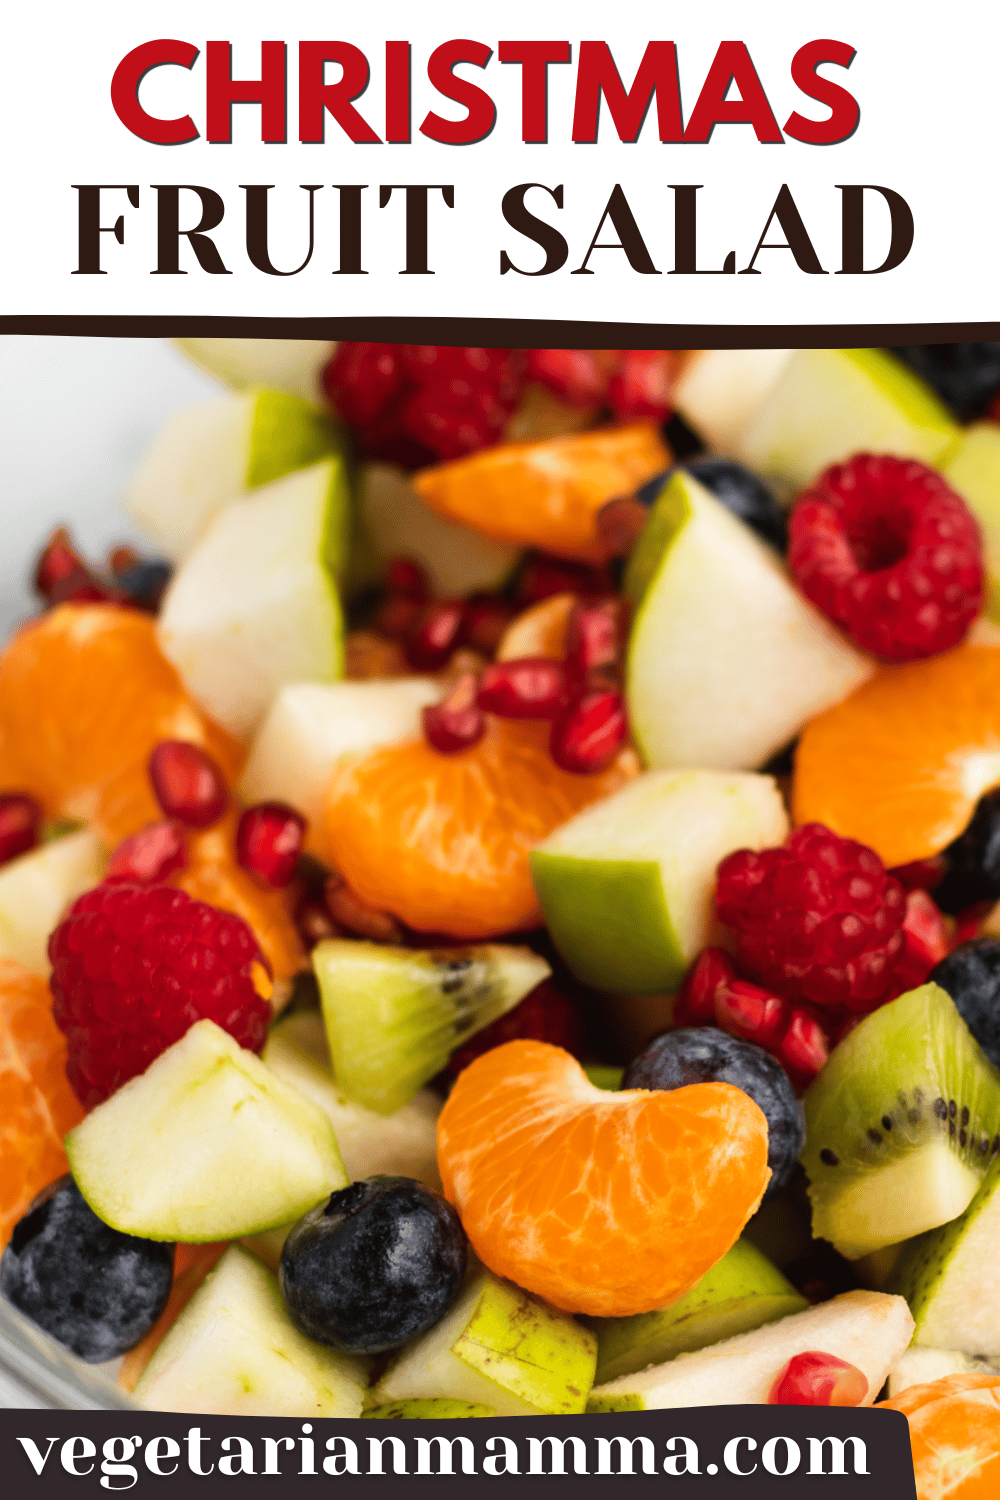 Christmas Fruit Salad is a perfect mix of winter fruits in bright festive colors for the holidays. This easy Christmas recipe takes just a few minutes to make, and everyone will love it!